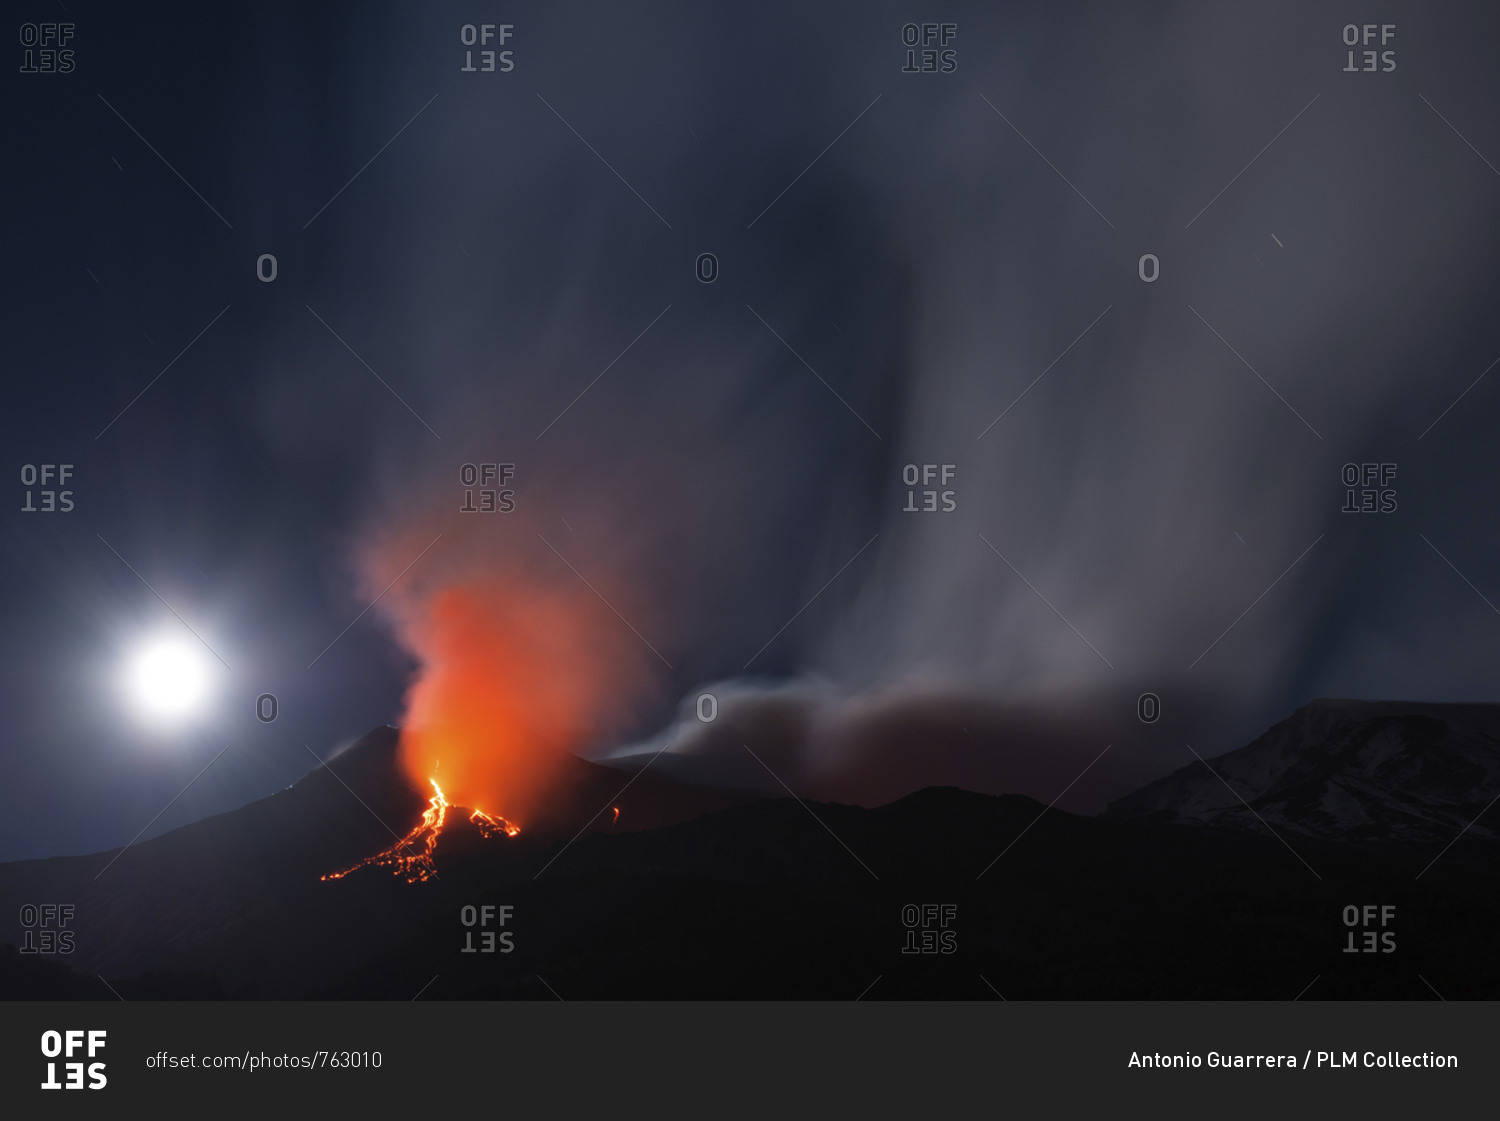 Etna and the moon in a nighttime eruption, Etna mount, Sicily, Italy, Europe